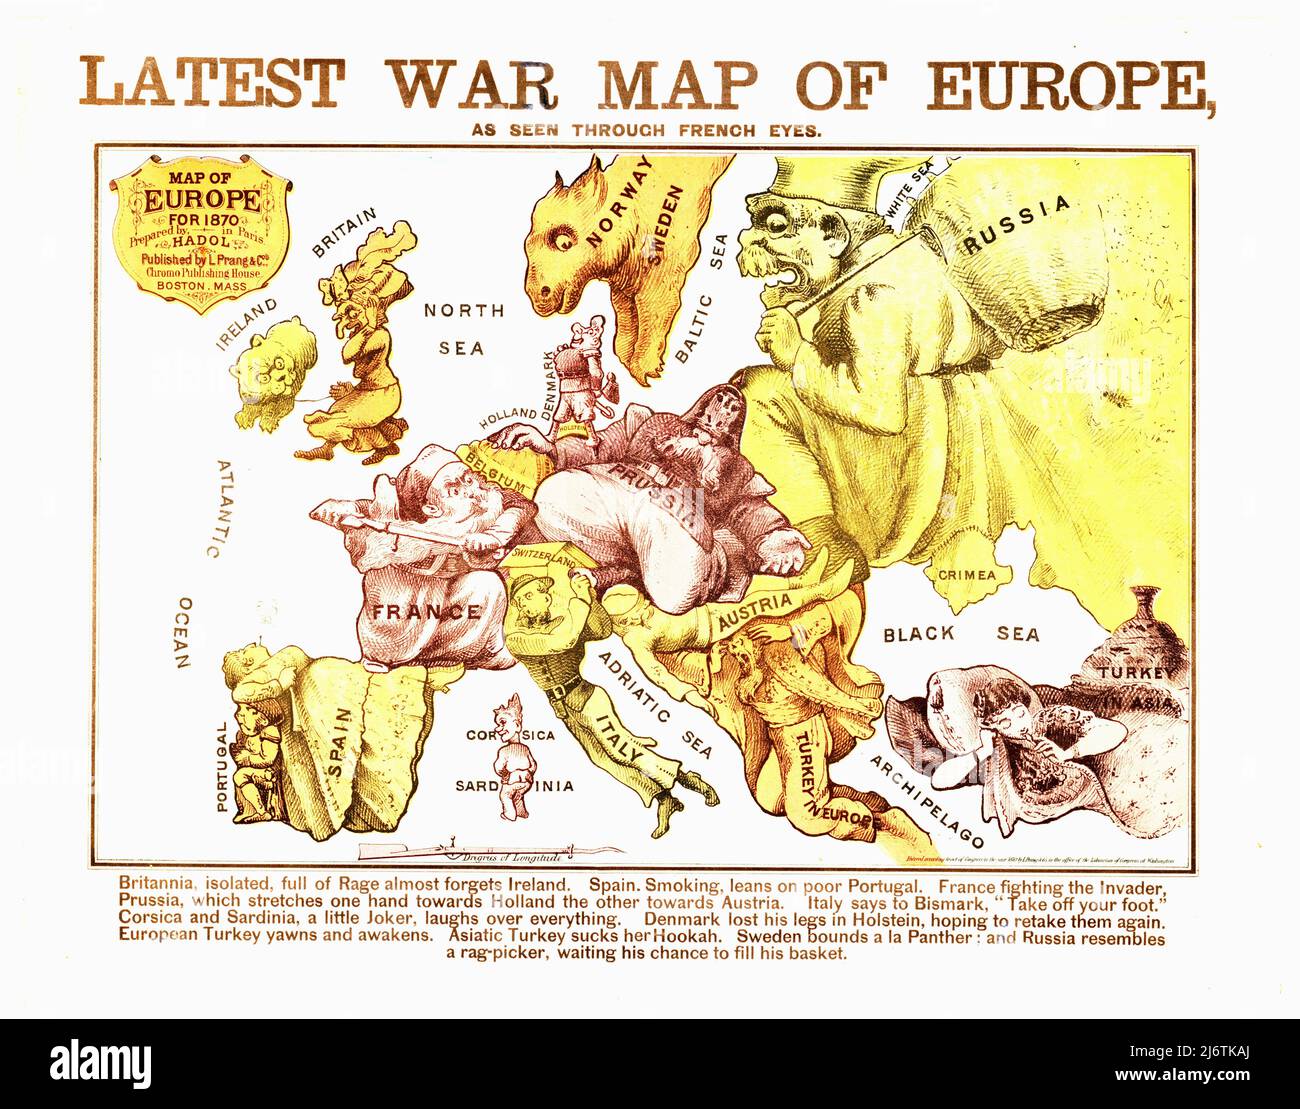 Latest War Map of Europe Stock Photo